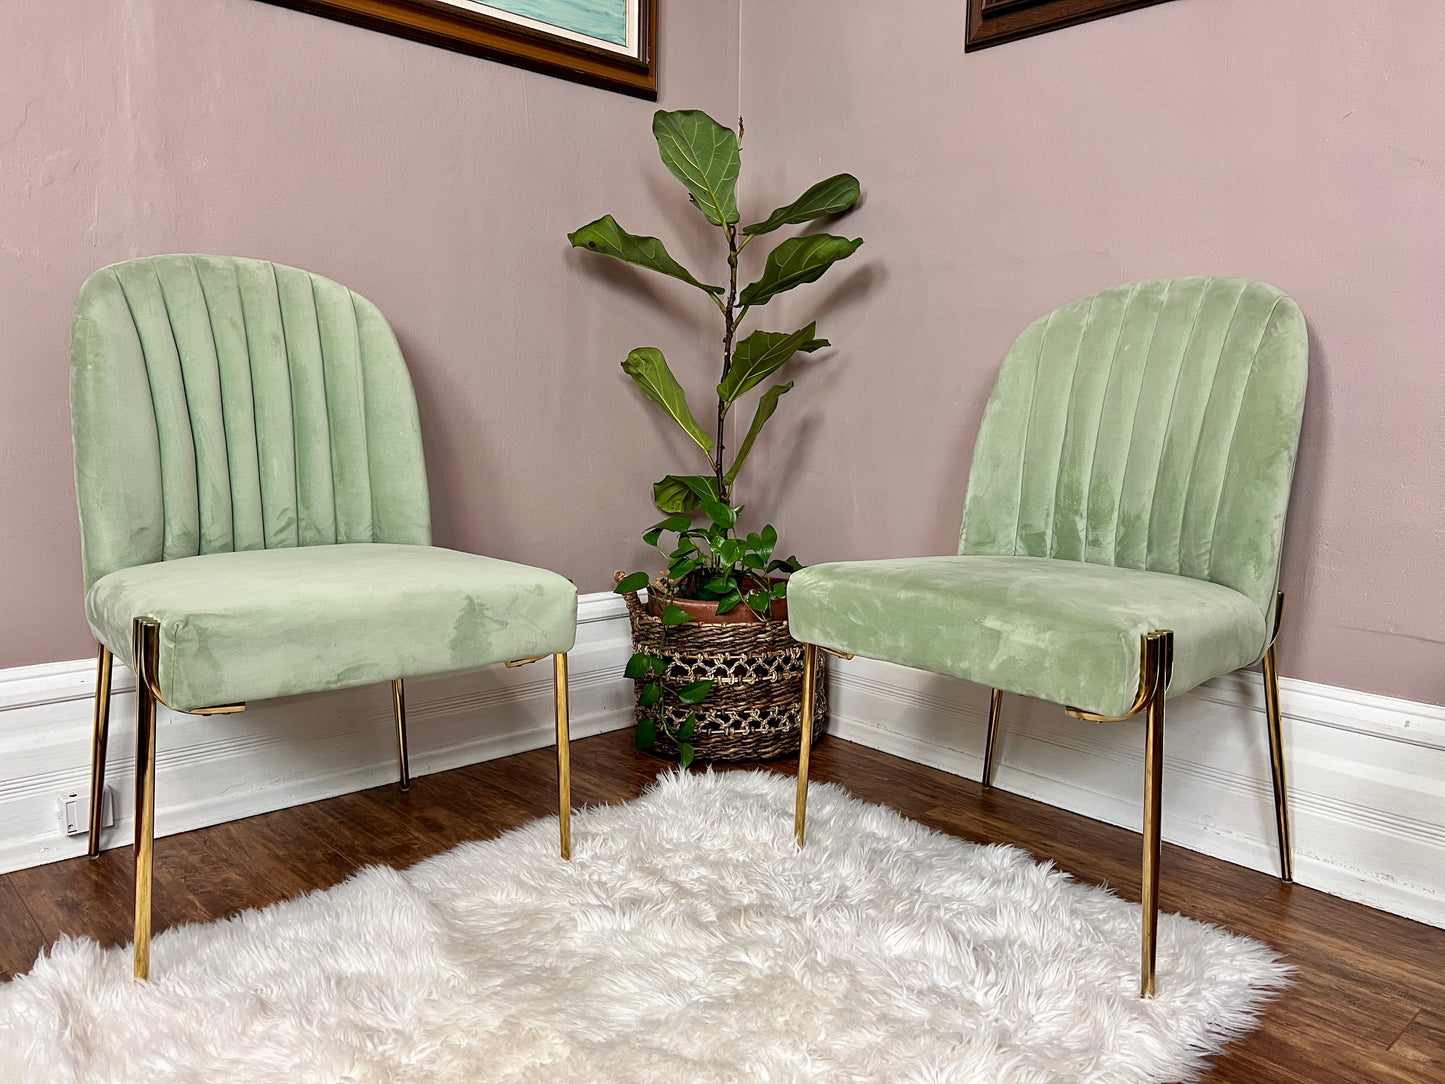 The Spearmint Chairs